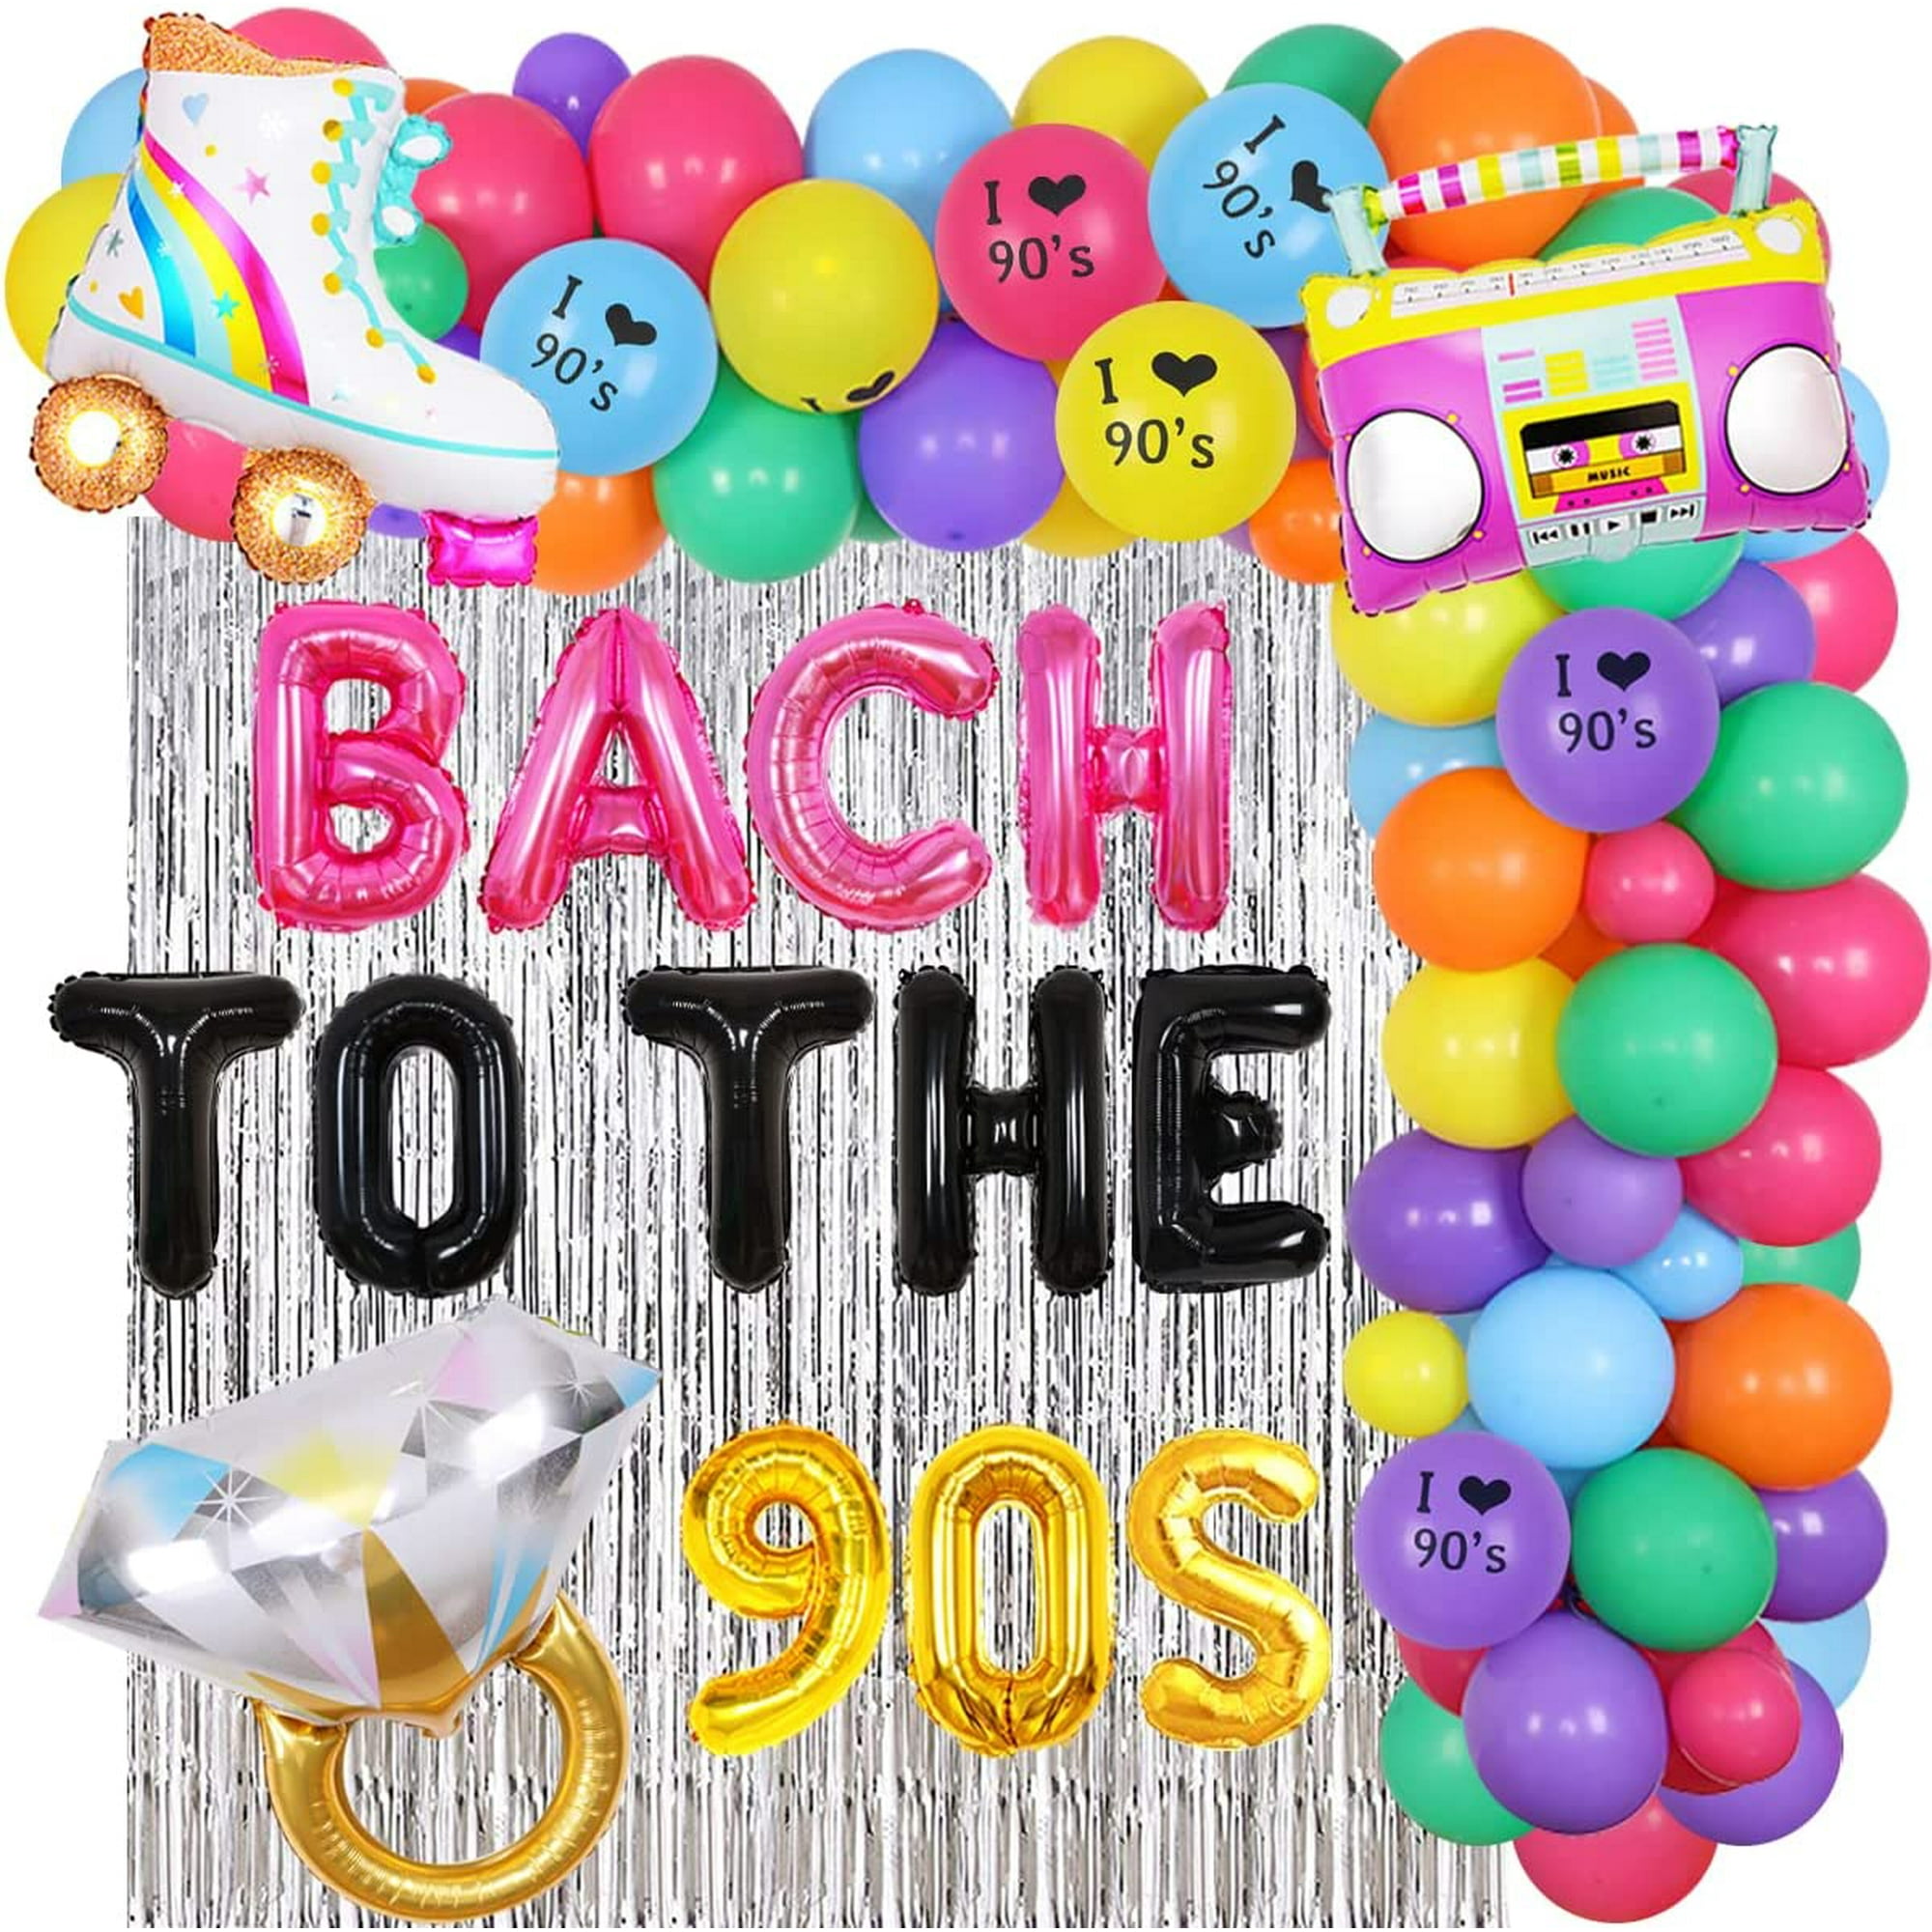 Bach To The 90s Bachelorette Decorations - Bach To The 90s ...